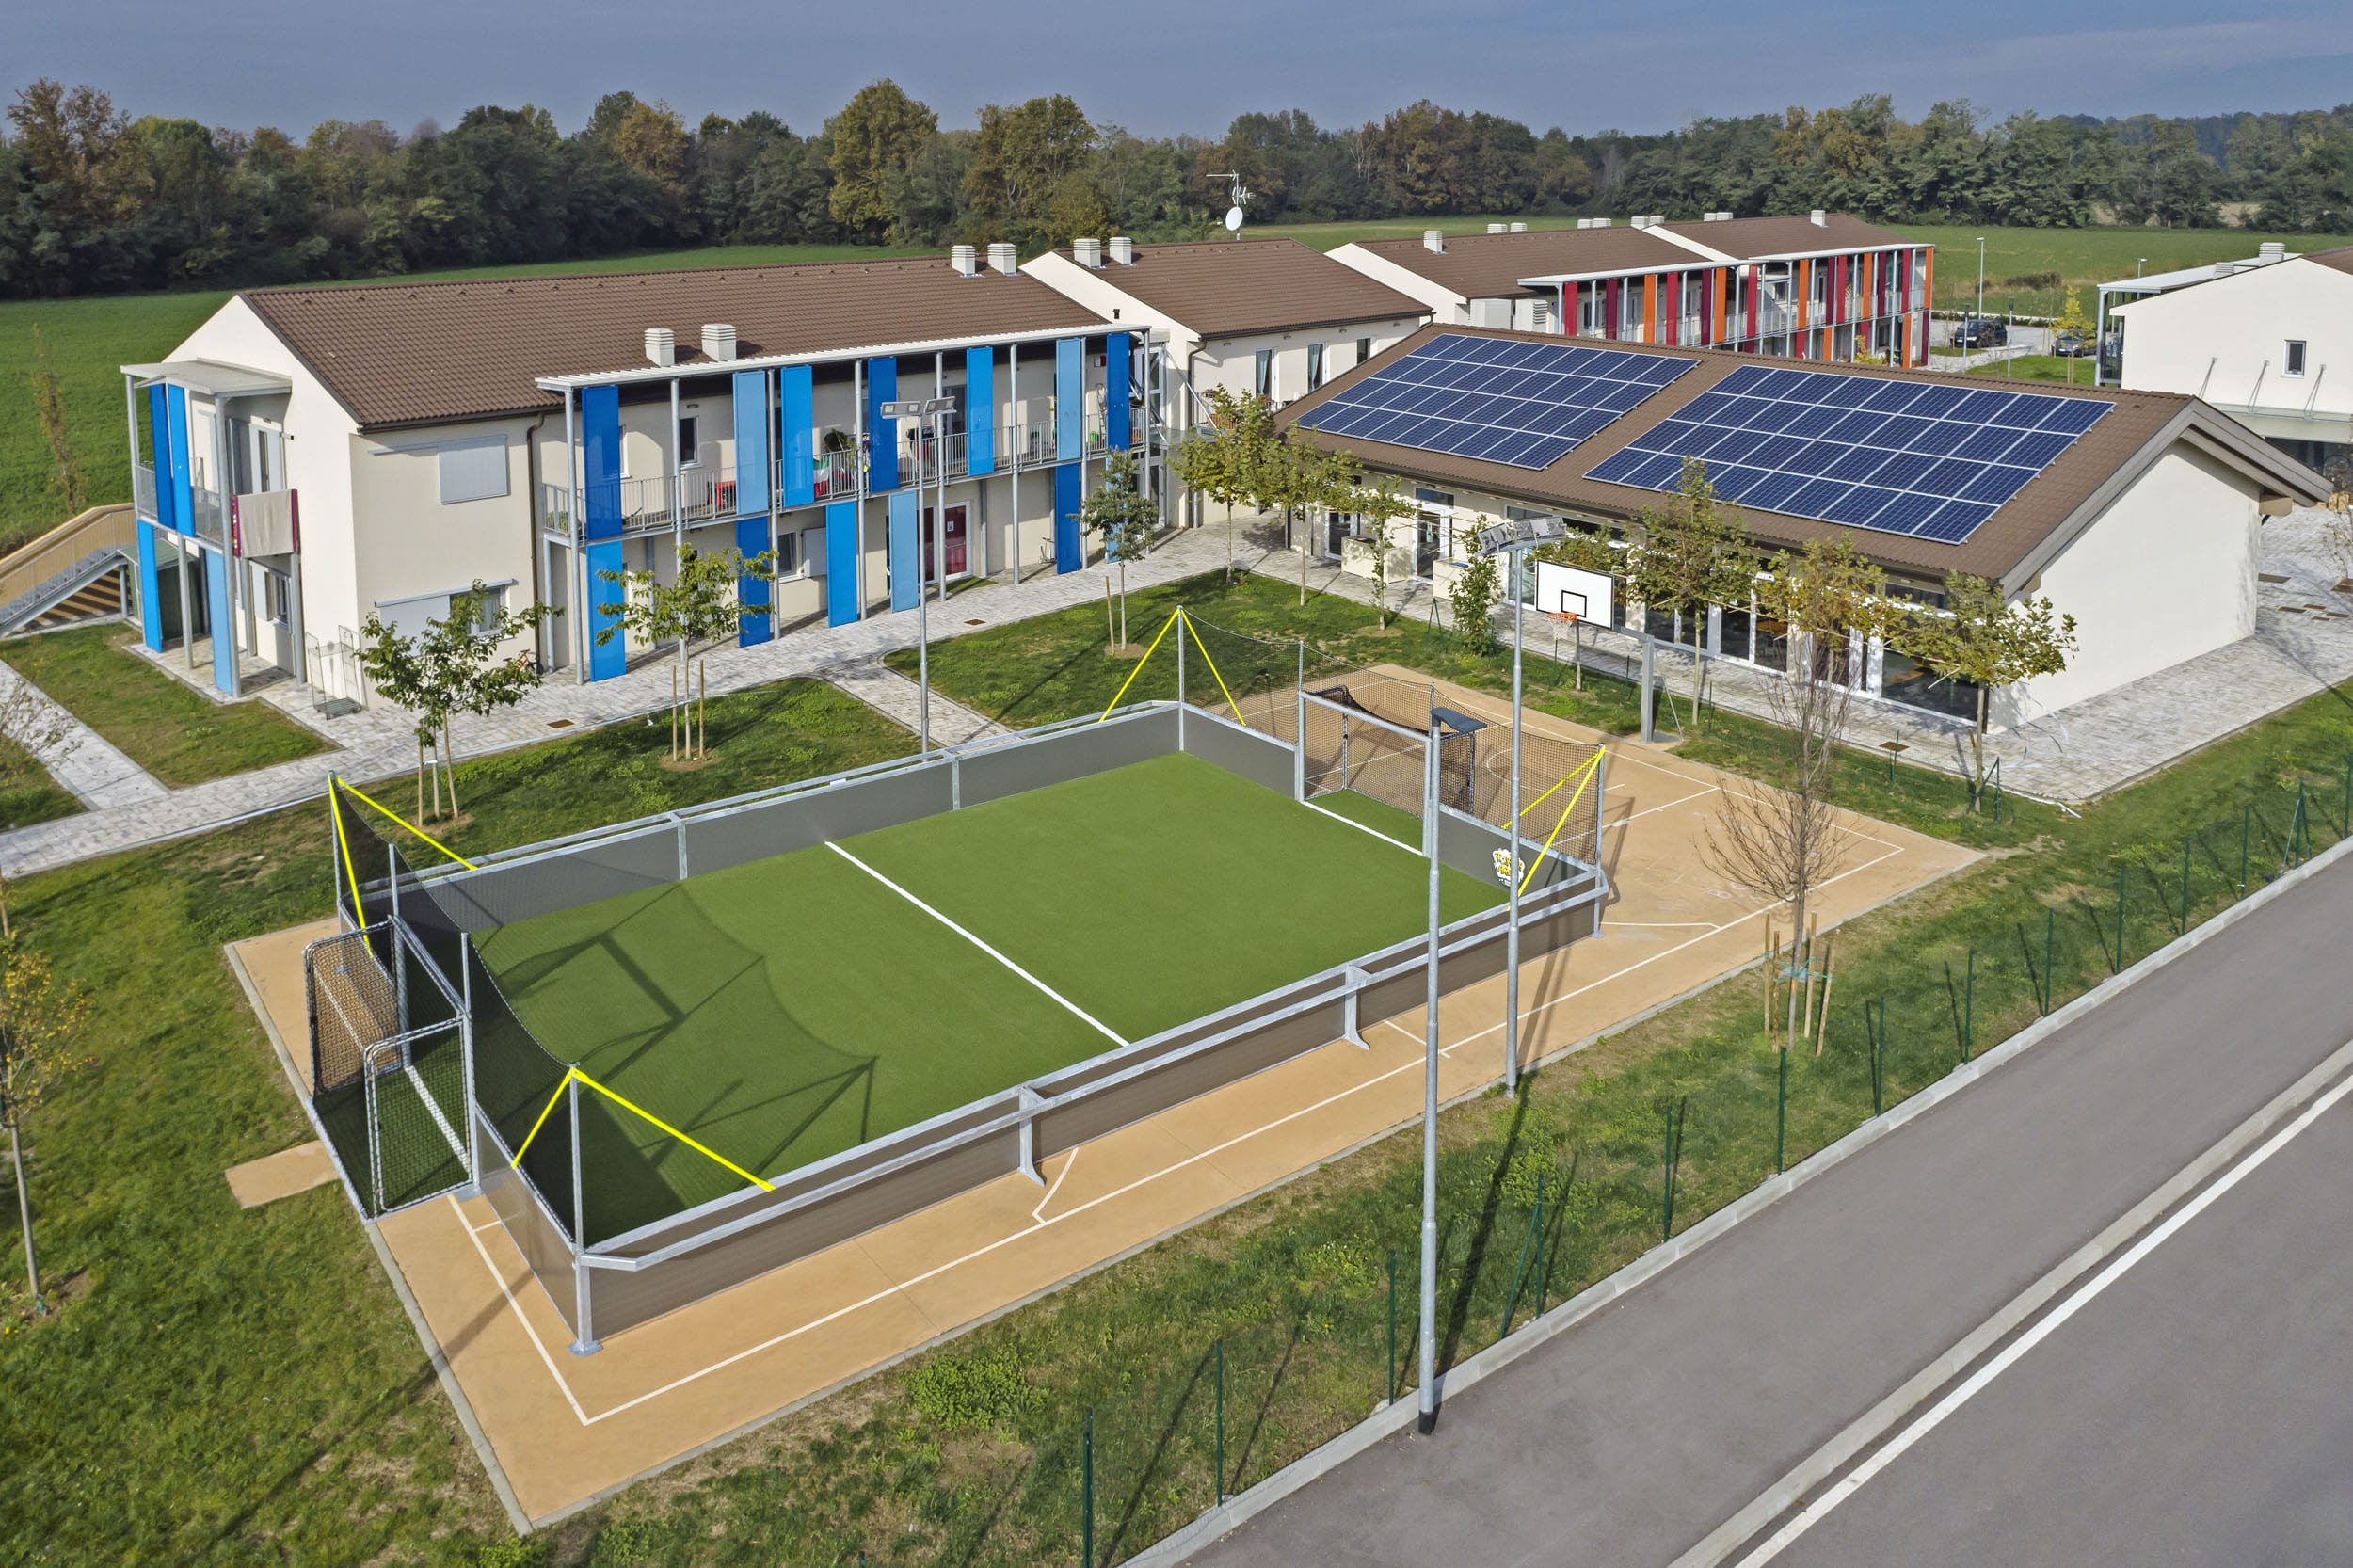 Donation as a sign of solidarity: Mini pitch in the heart of Lombardy